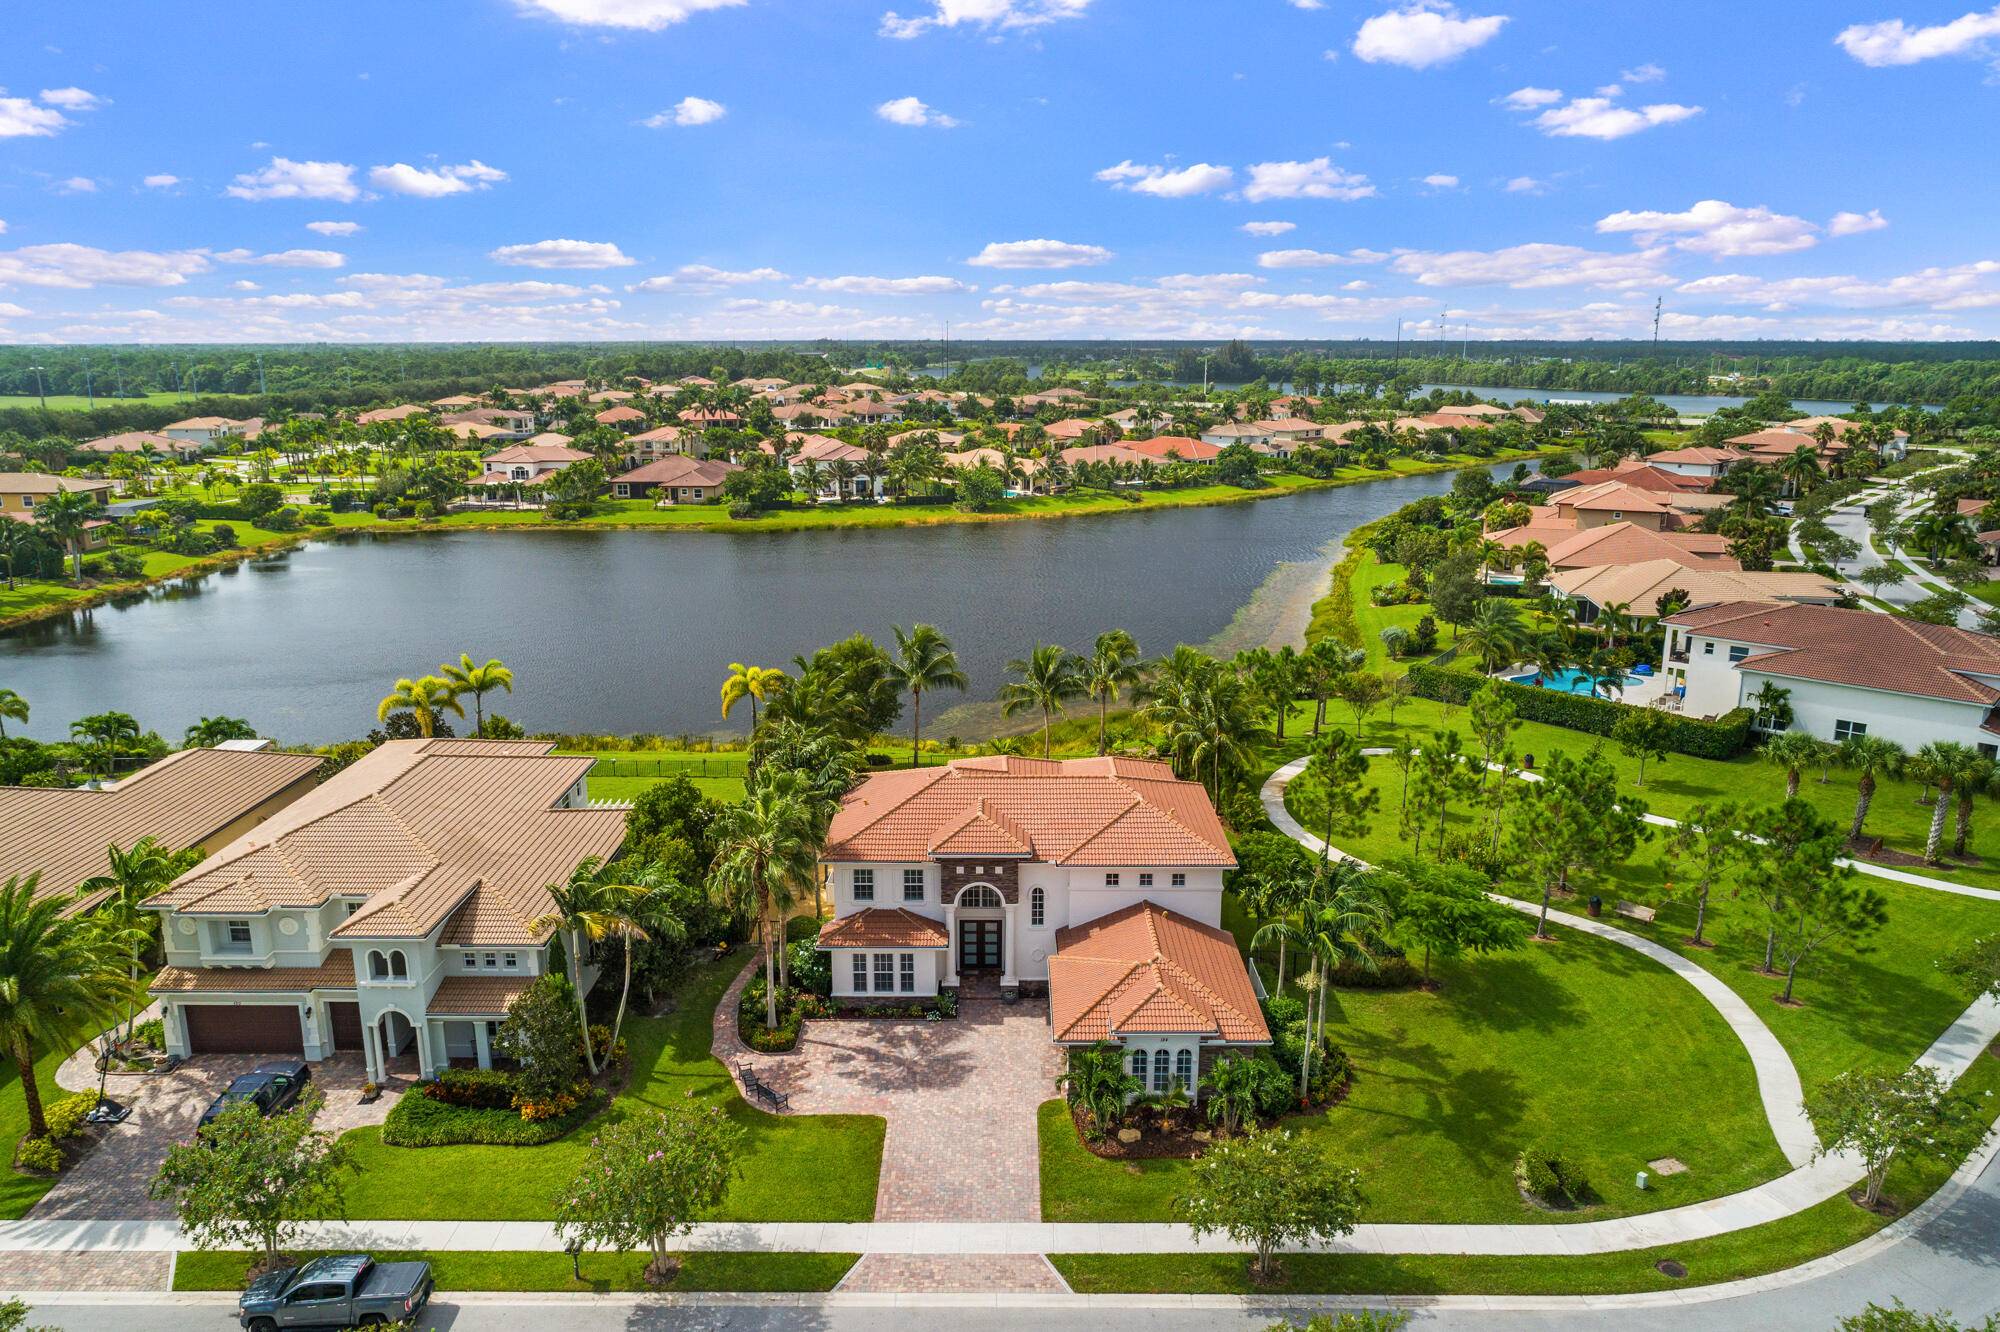 Stunning home situated on one of the most desirable lakefront lots within the gated community of Rialto.